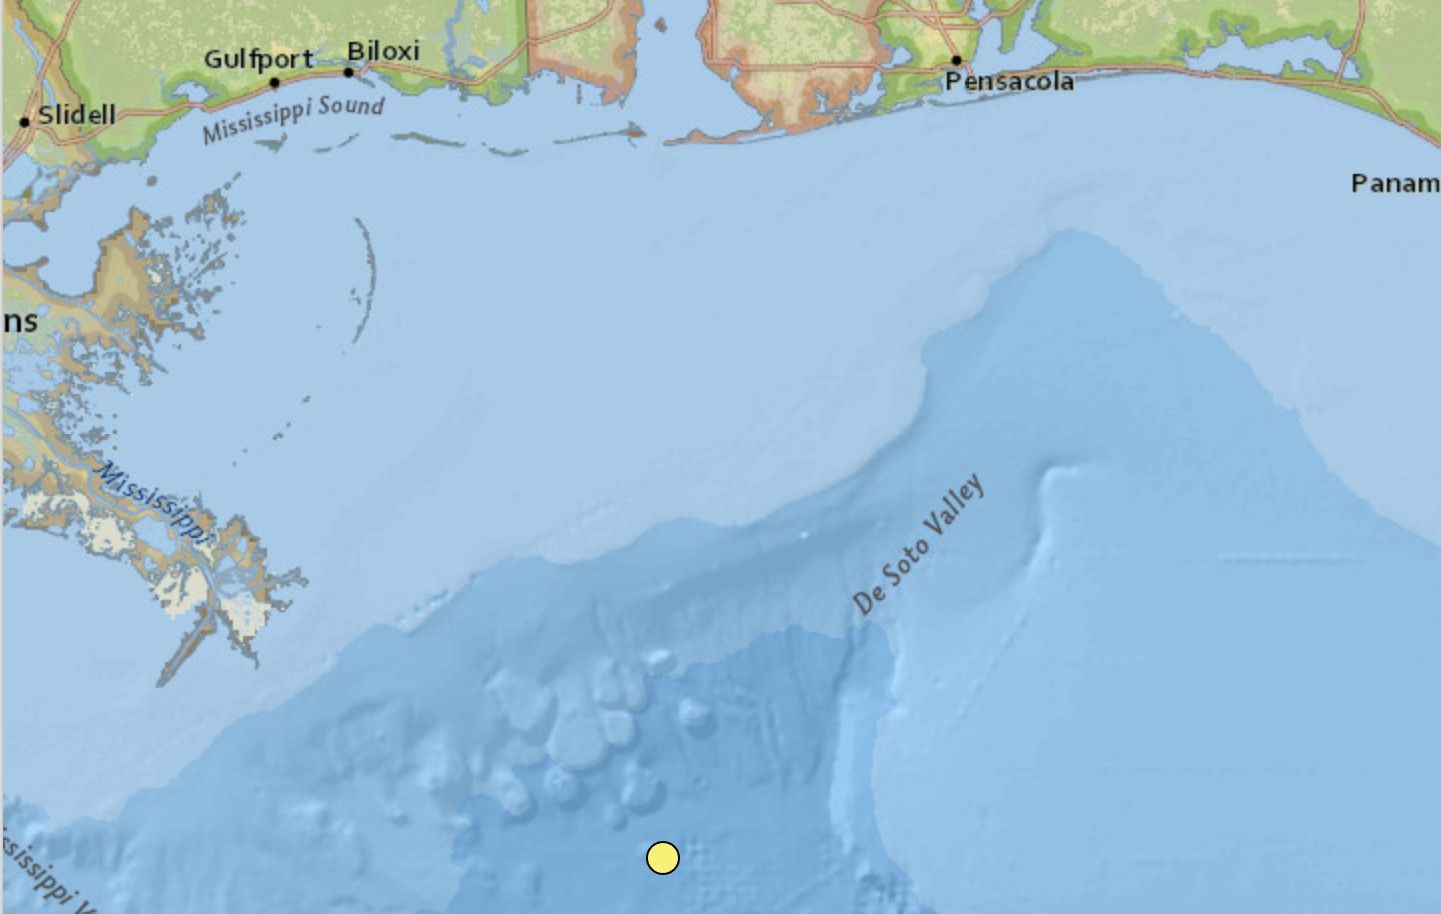 Earthquake in the Gulf of Mexico, 130 Miles South-Southwest of Orange Beach